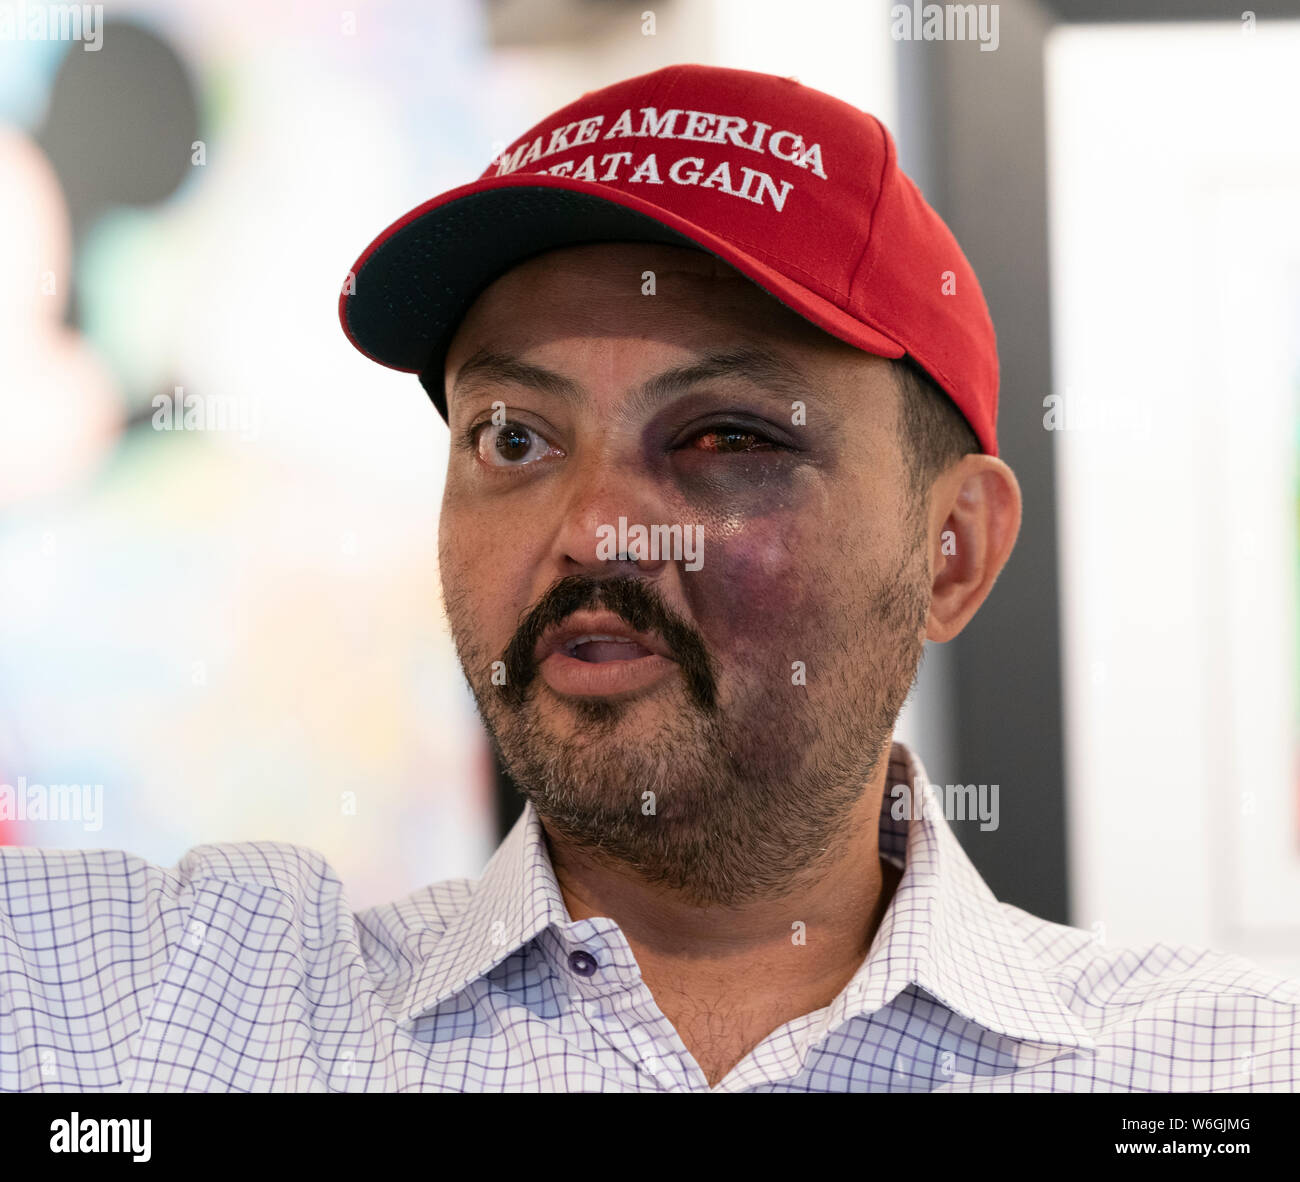 New York, NY - August 1, 2019: Jahangir Turan speaks at press conference after being beaten for wearing MAGA hat on the street of New York City by 15 teenagers at David Parker Gallery Stock Photo